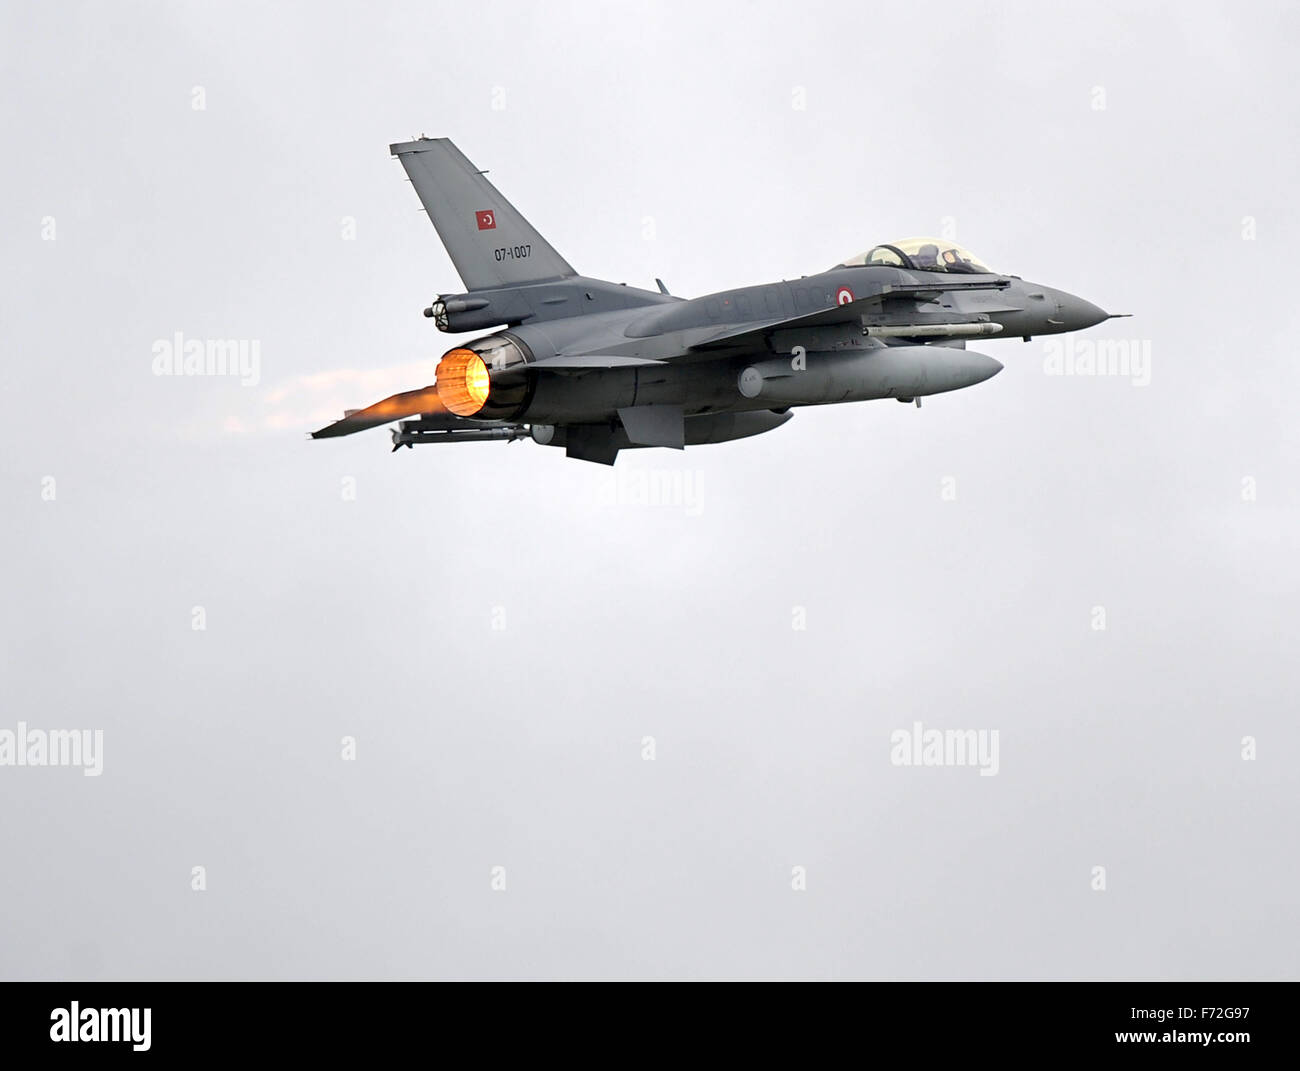 (File) A Lockheed Martin F-16 of the Turkish air force is pictured starting from German Air Force Base Wittmund (Lower Saxony) on 15 May 2014 during the 'JAWTEX 2014'. Photo: Ingo Wagner/dpa Stock Photo